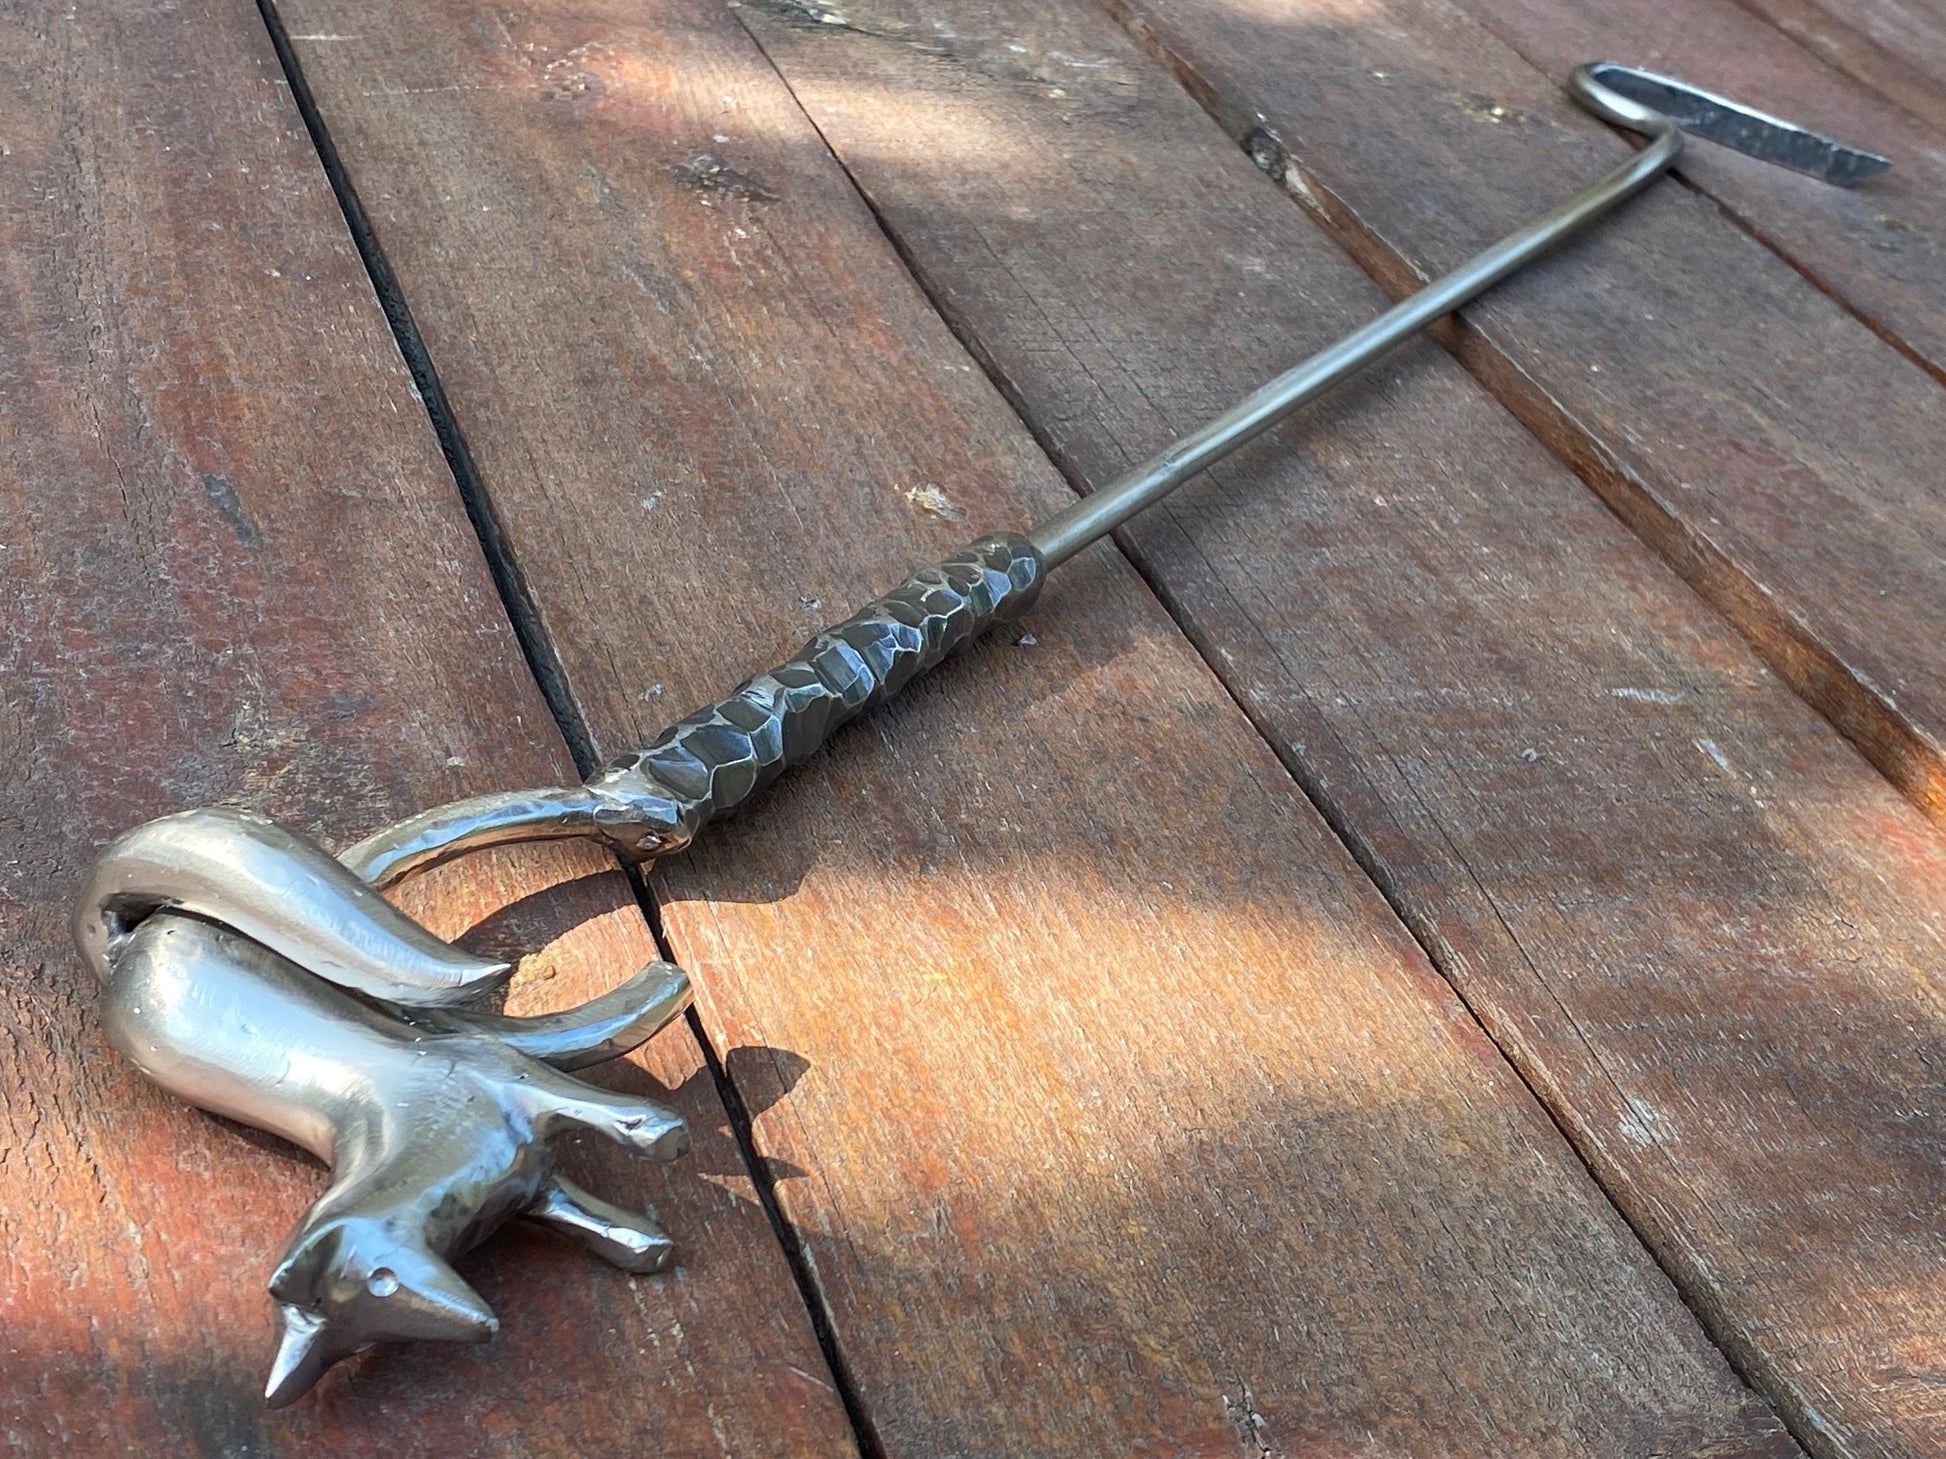 Fire poker, fox, stainless steel, Christmas, daddy, camp, picnic, camping, BBQ, travelers gift,fire pit,firewood,steel gift,11th anniversary